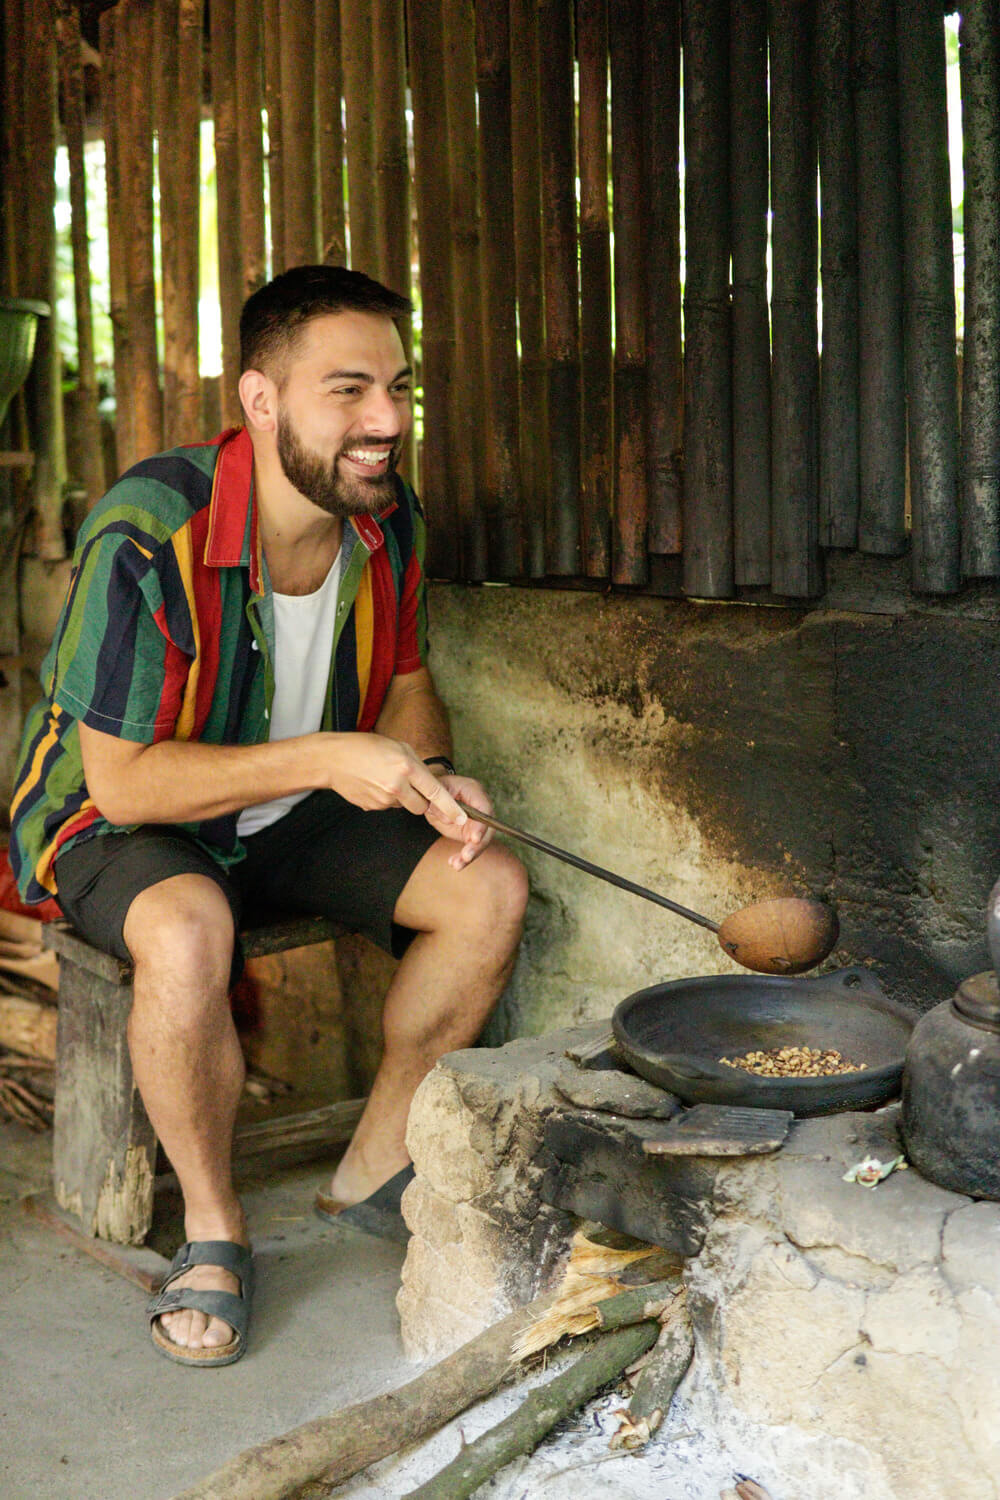 Nick sitting in a tropical hut cooking nuts over a fire.